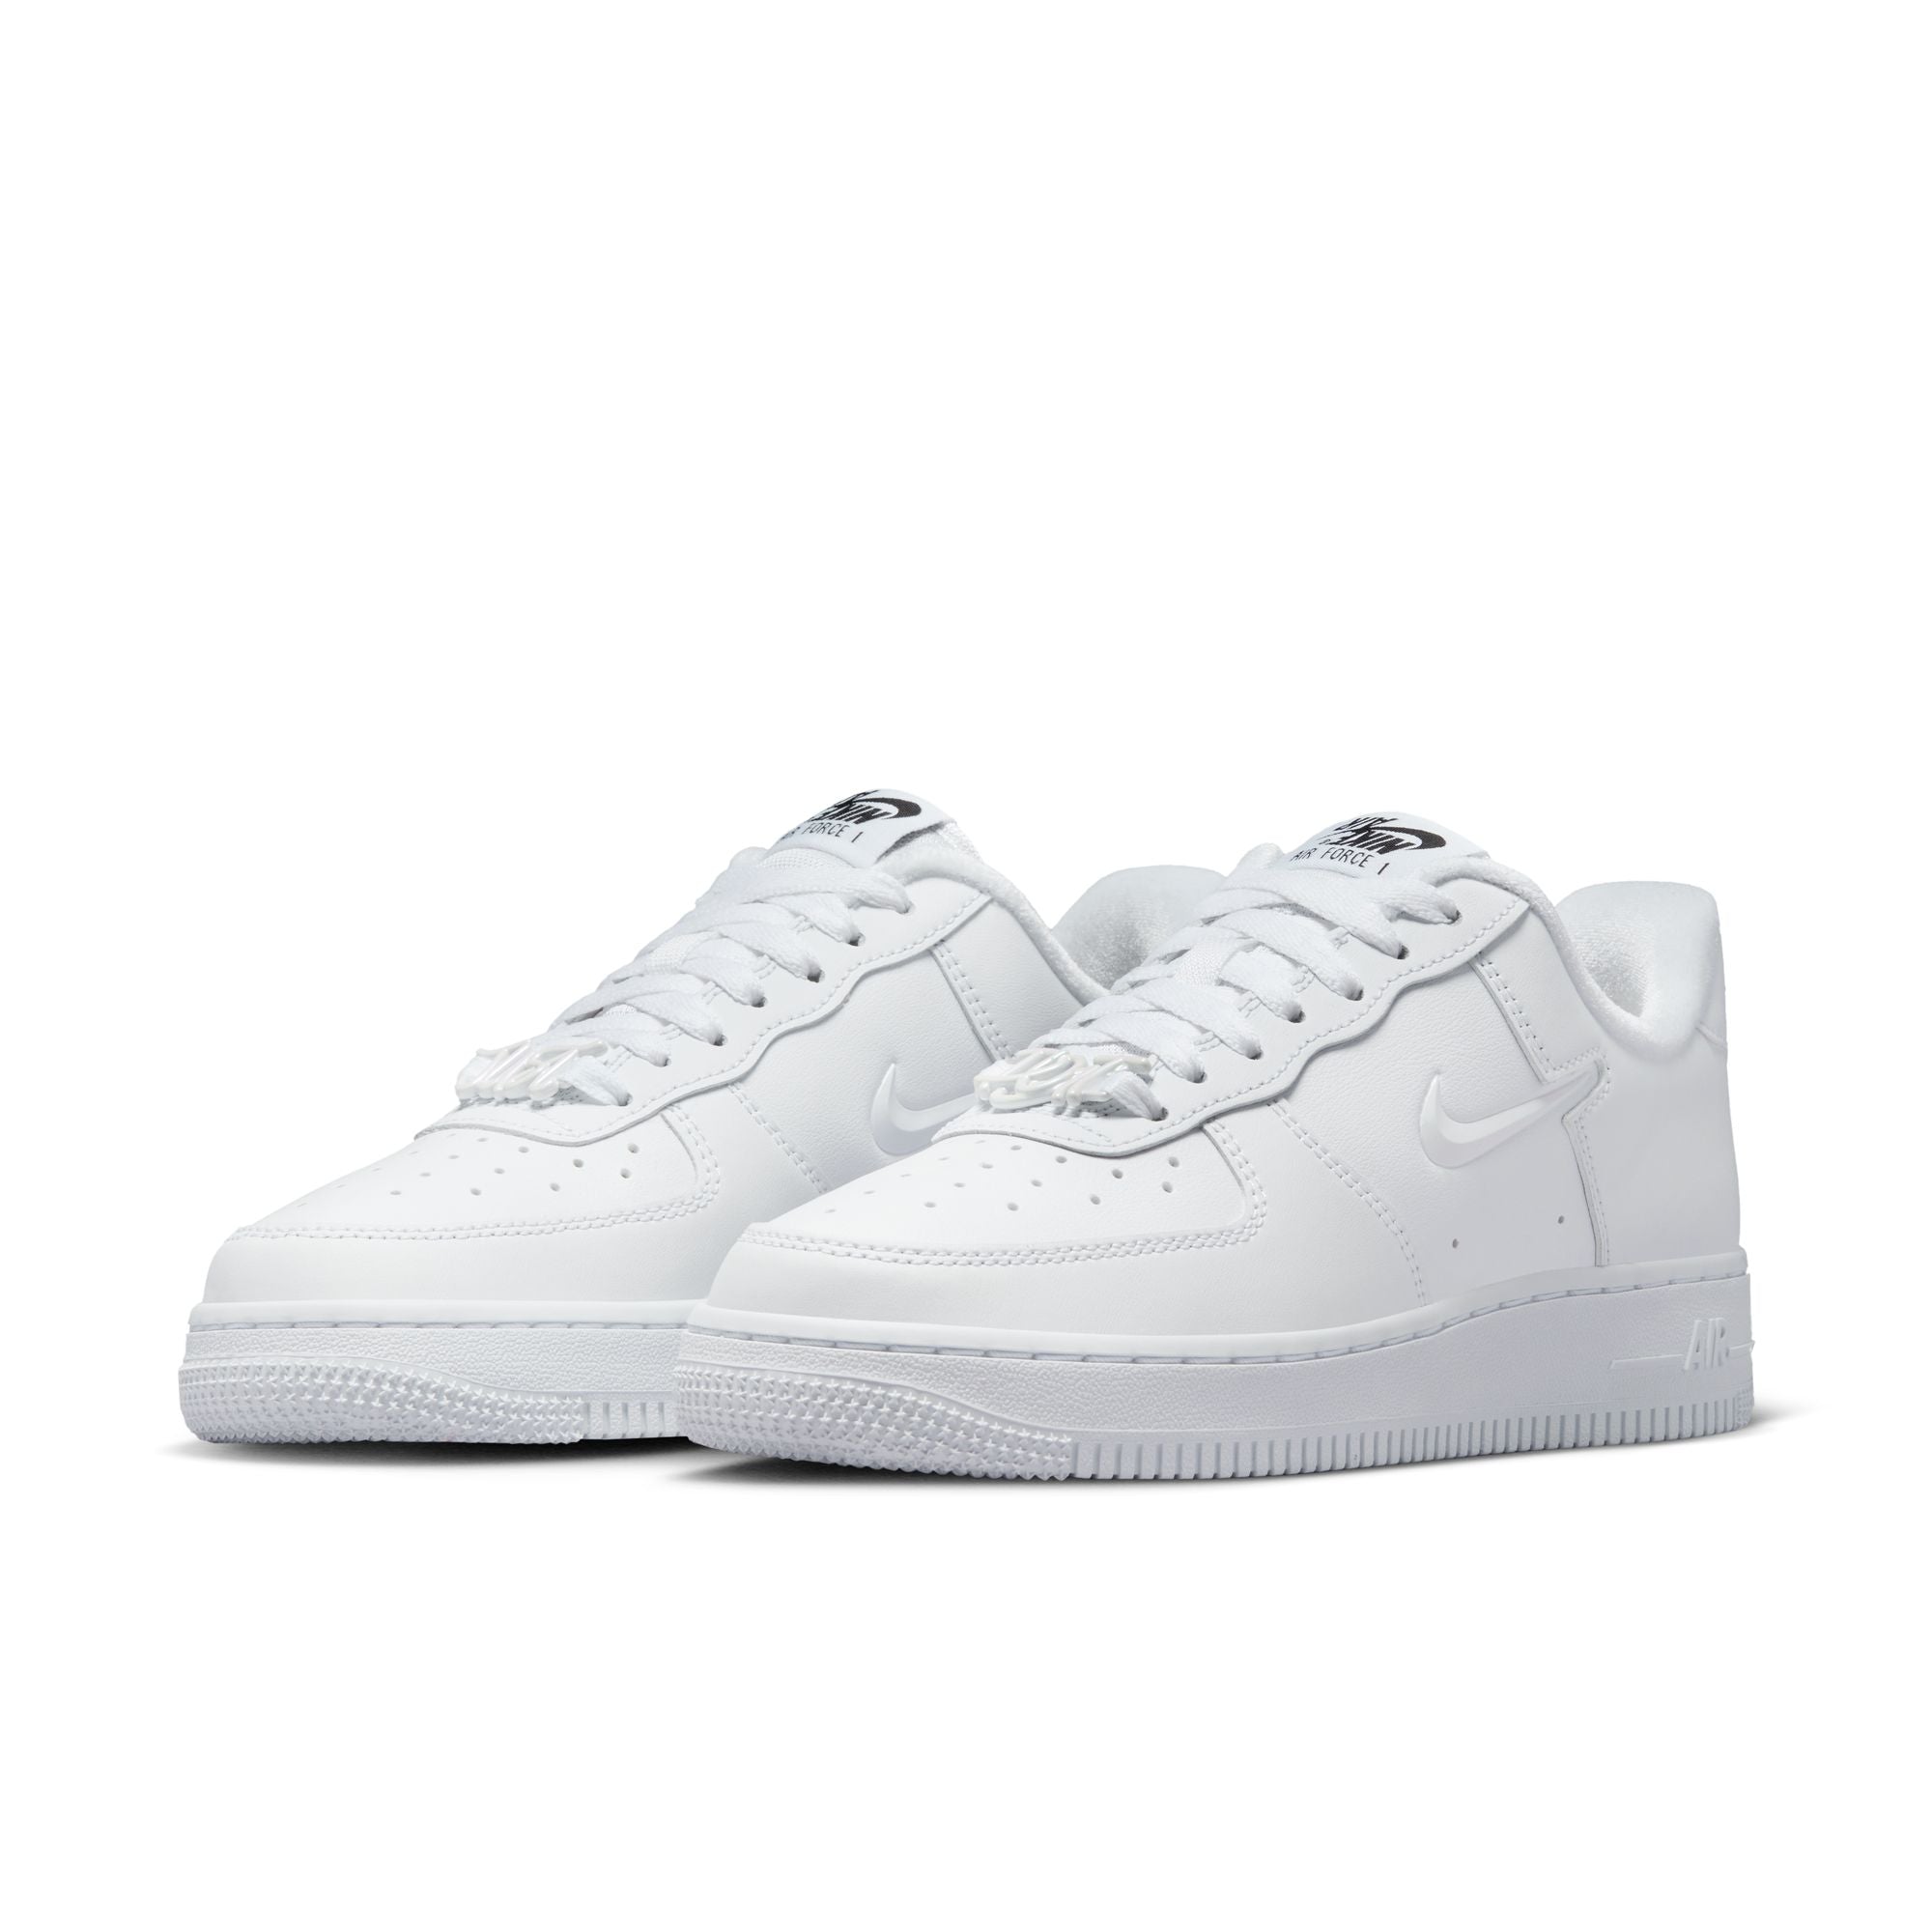 Air Force 1 '07 W - INVINCIBLE